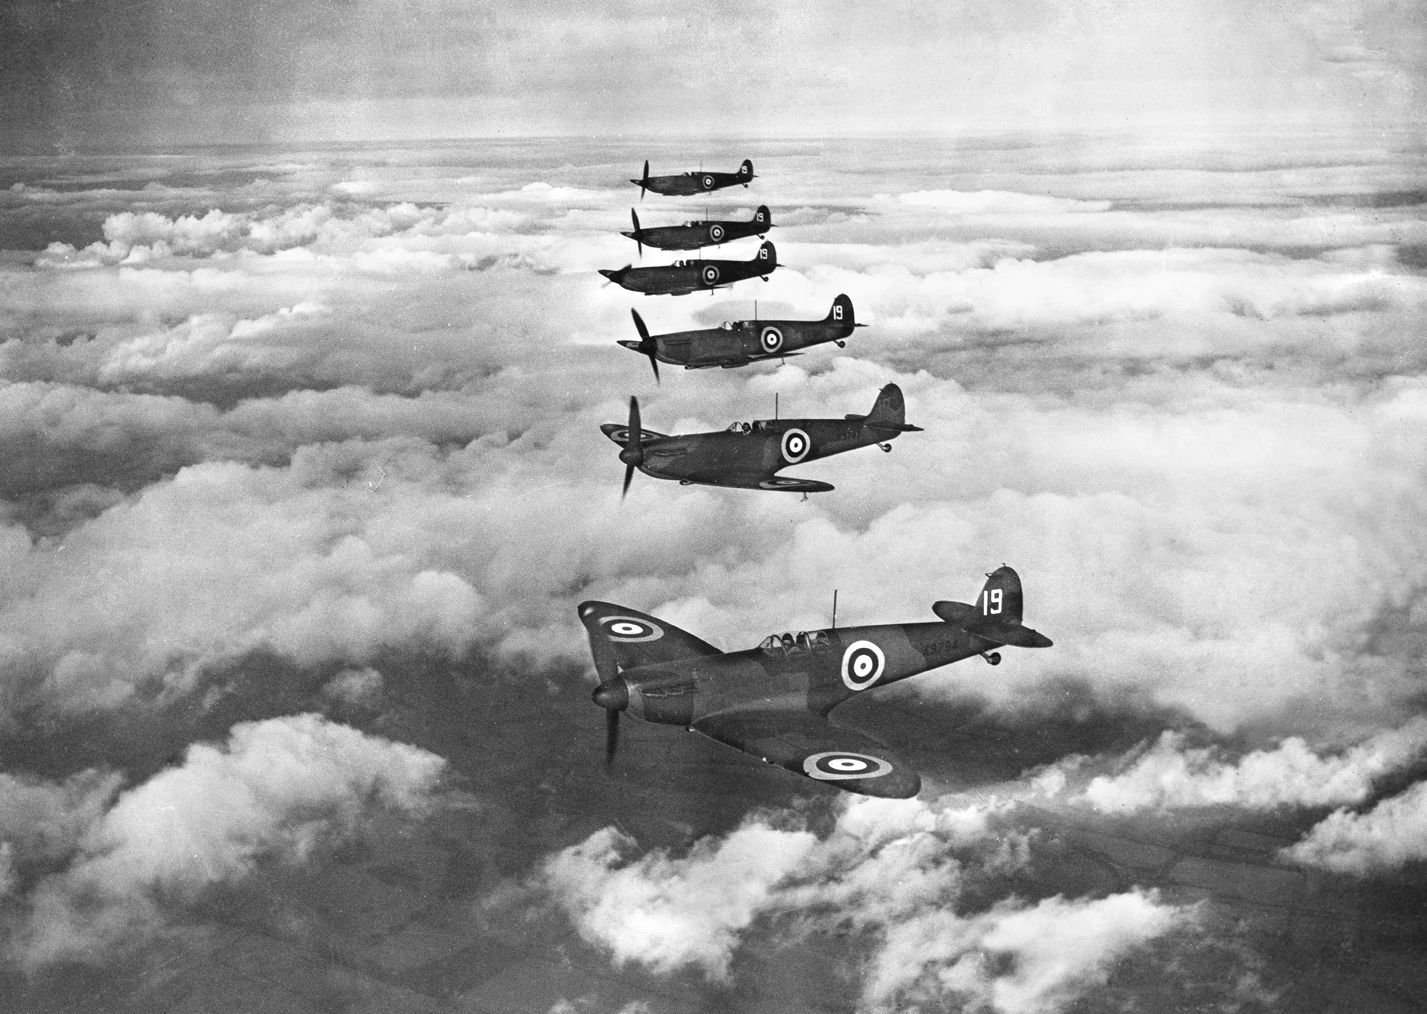 A flight of Supermarine Spitfire fighters is a breathtaking sight in the sky above Europe. The Spitfire received tremendous credit for defeating the Luftwaffe during the Battle of Britain.